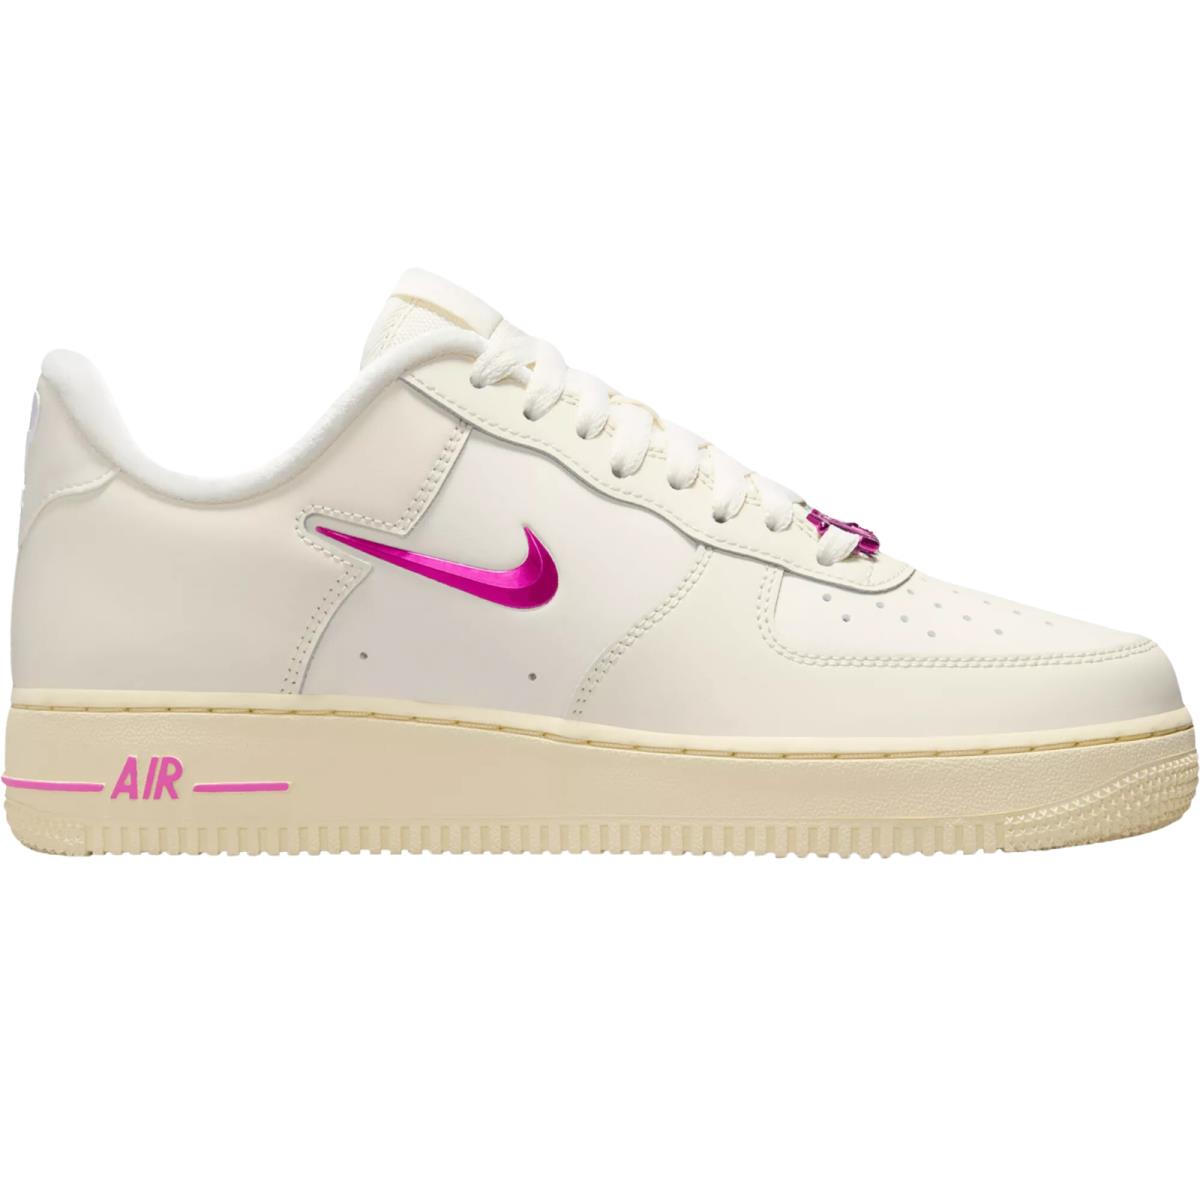 Nike Air Force 1 Women`s Casual Shoes All Colors US Sizes 6-11 Coconut Milk/Alabaster/Coconut Milk/Playful Pink